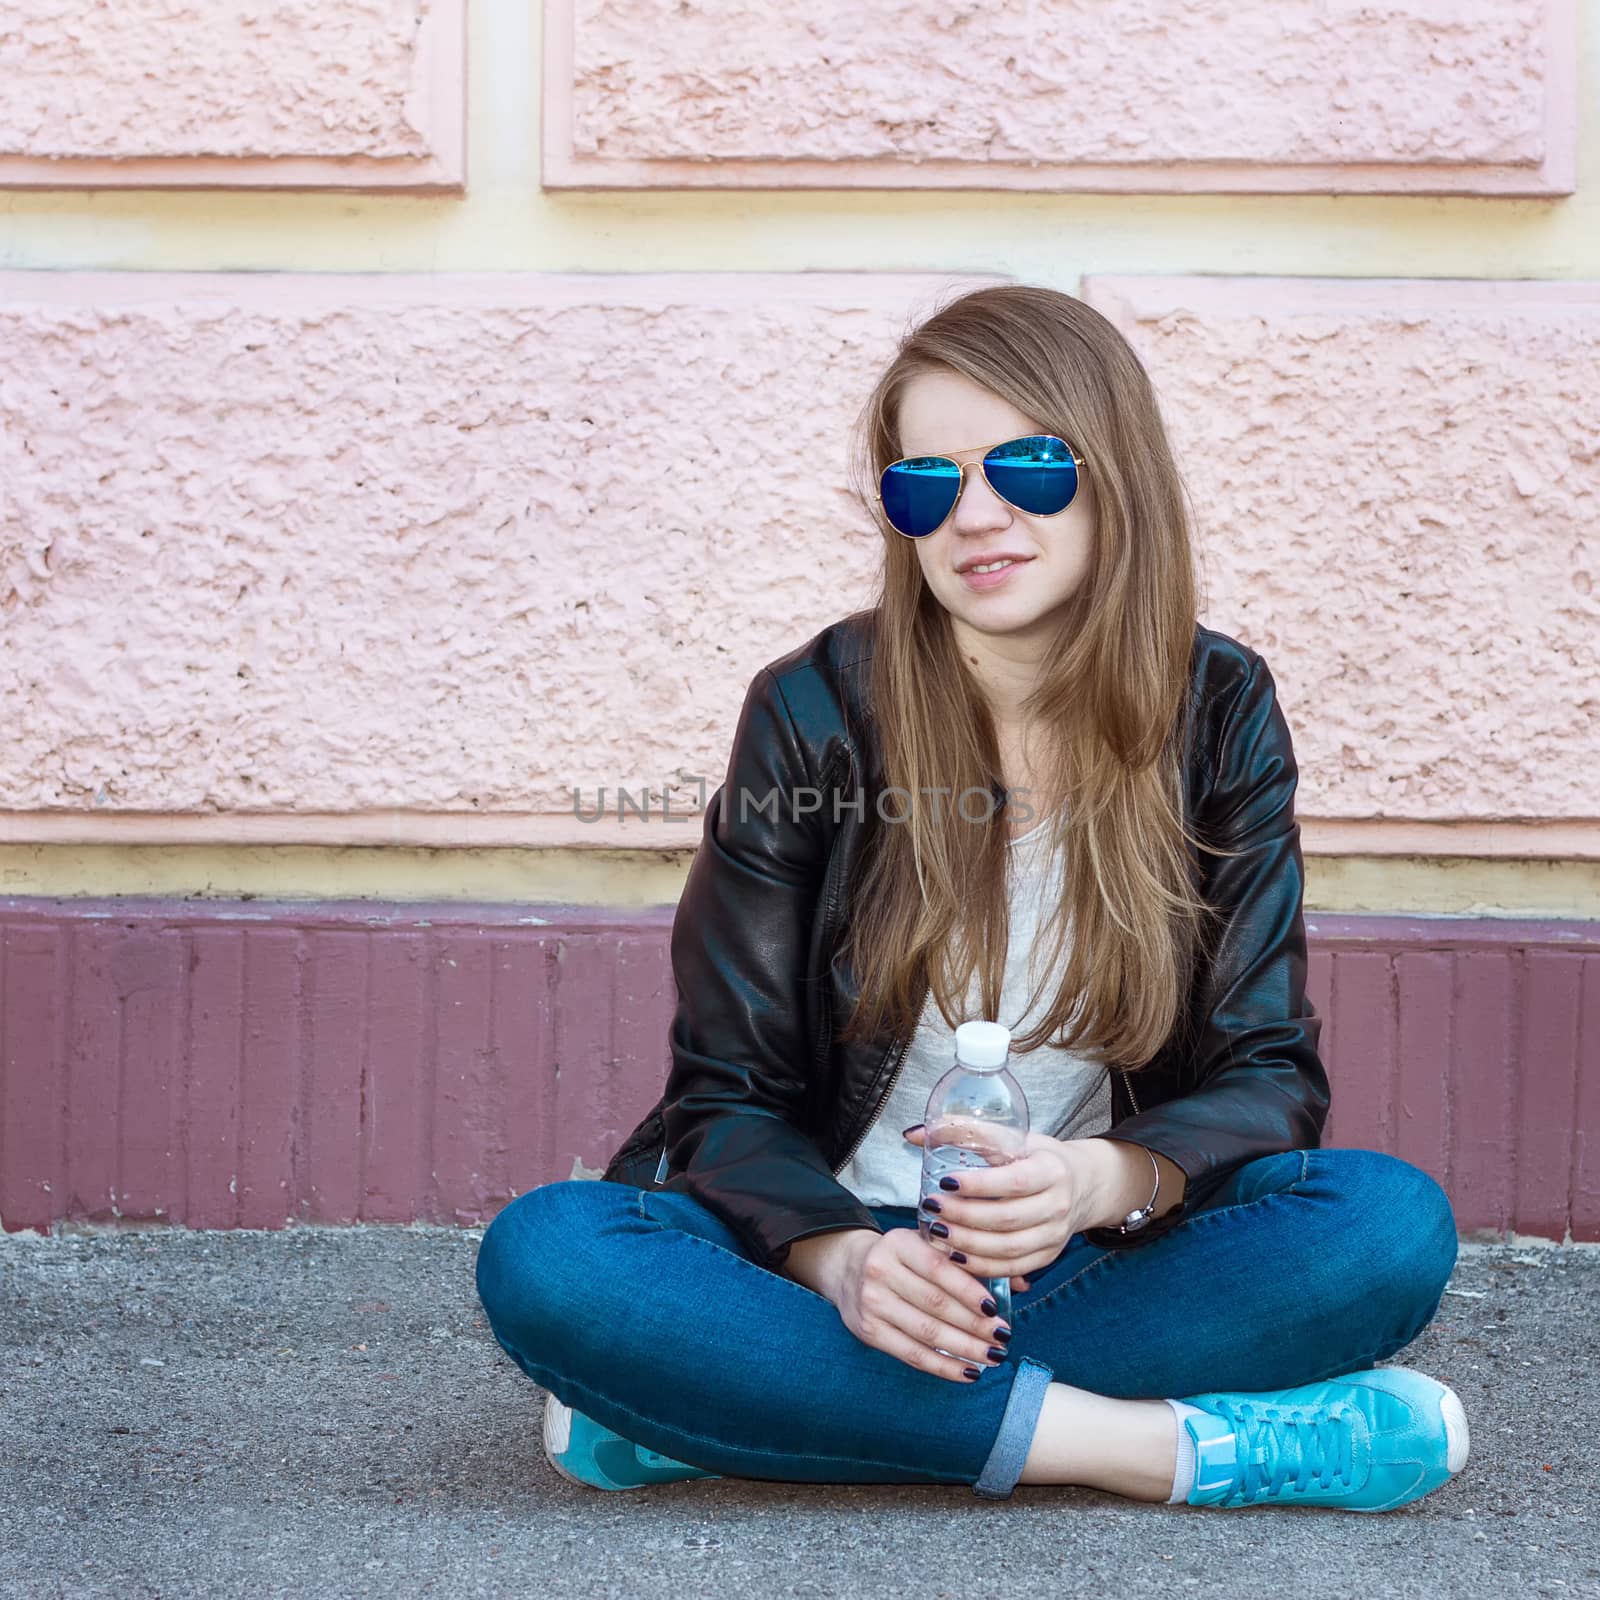 Girl in jacket, jeans and sunglasses sitting on pavement by victosha